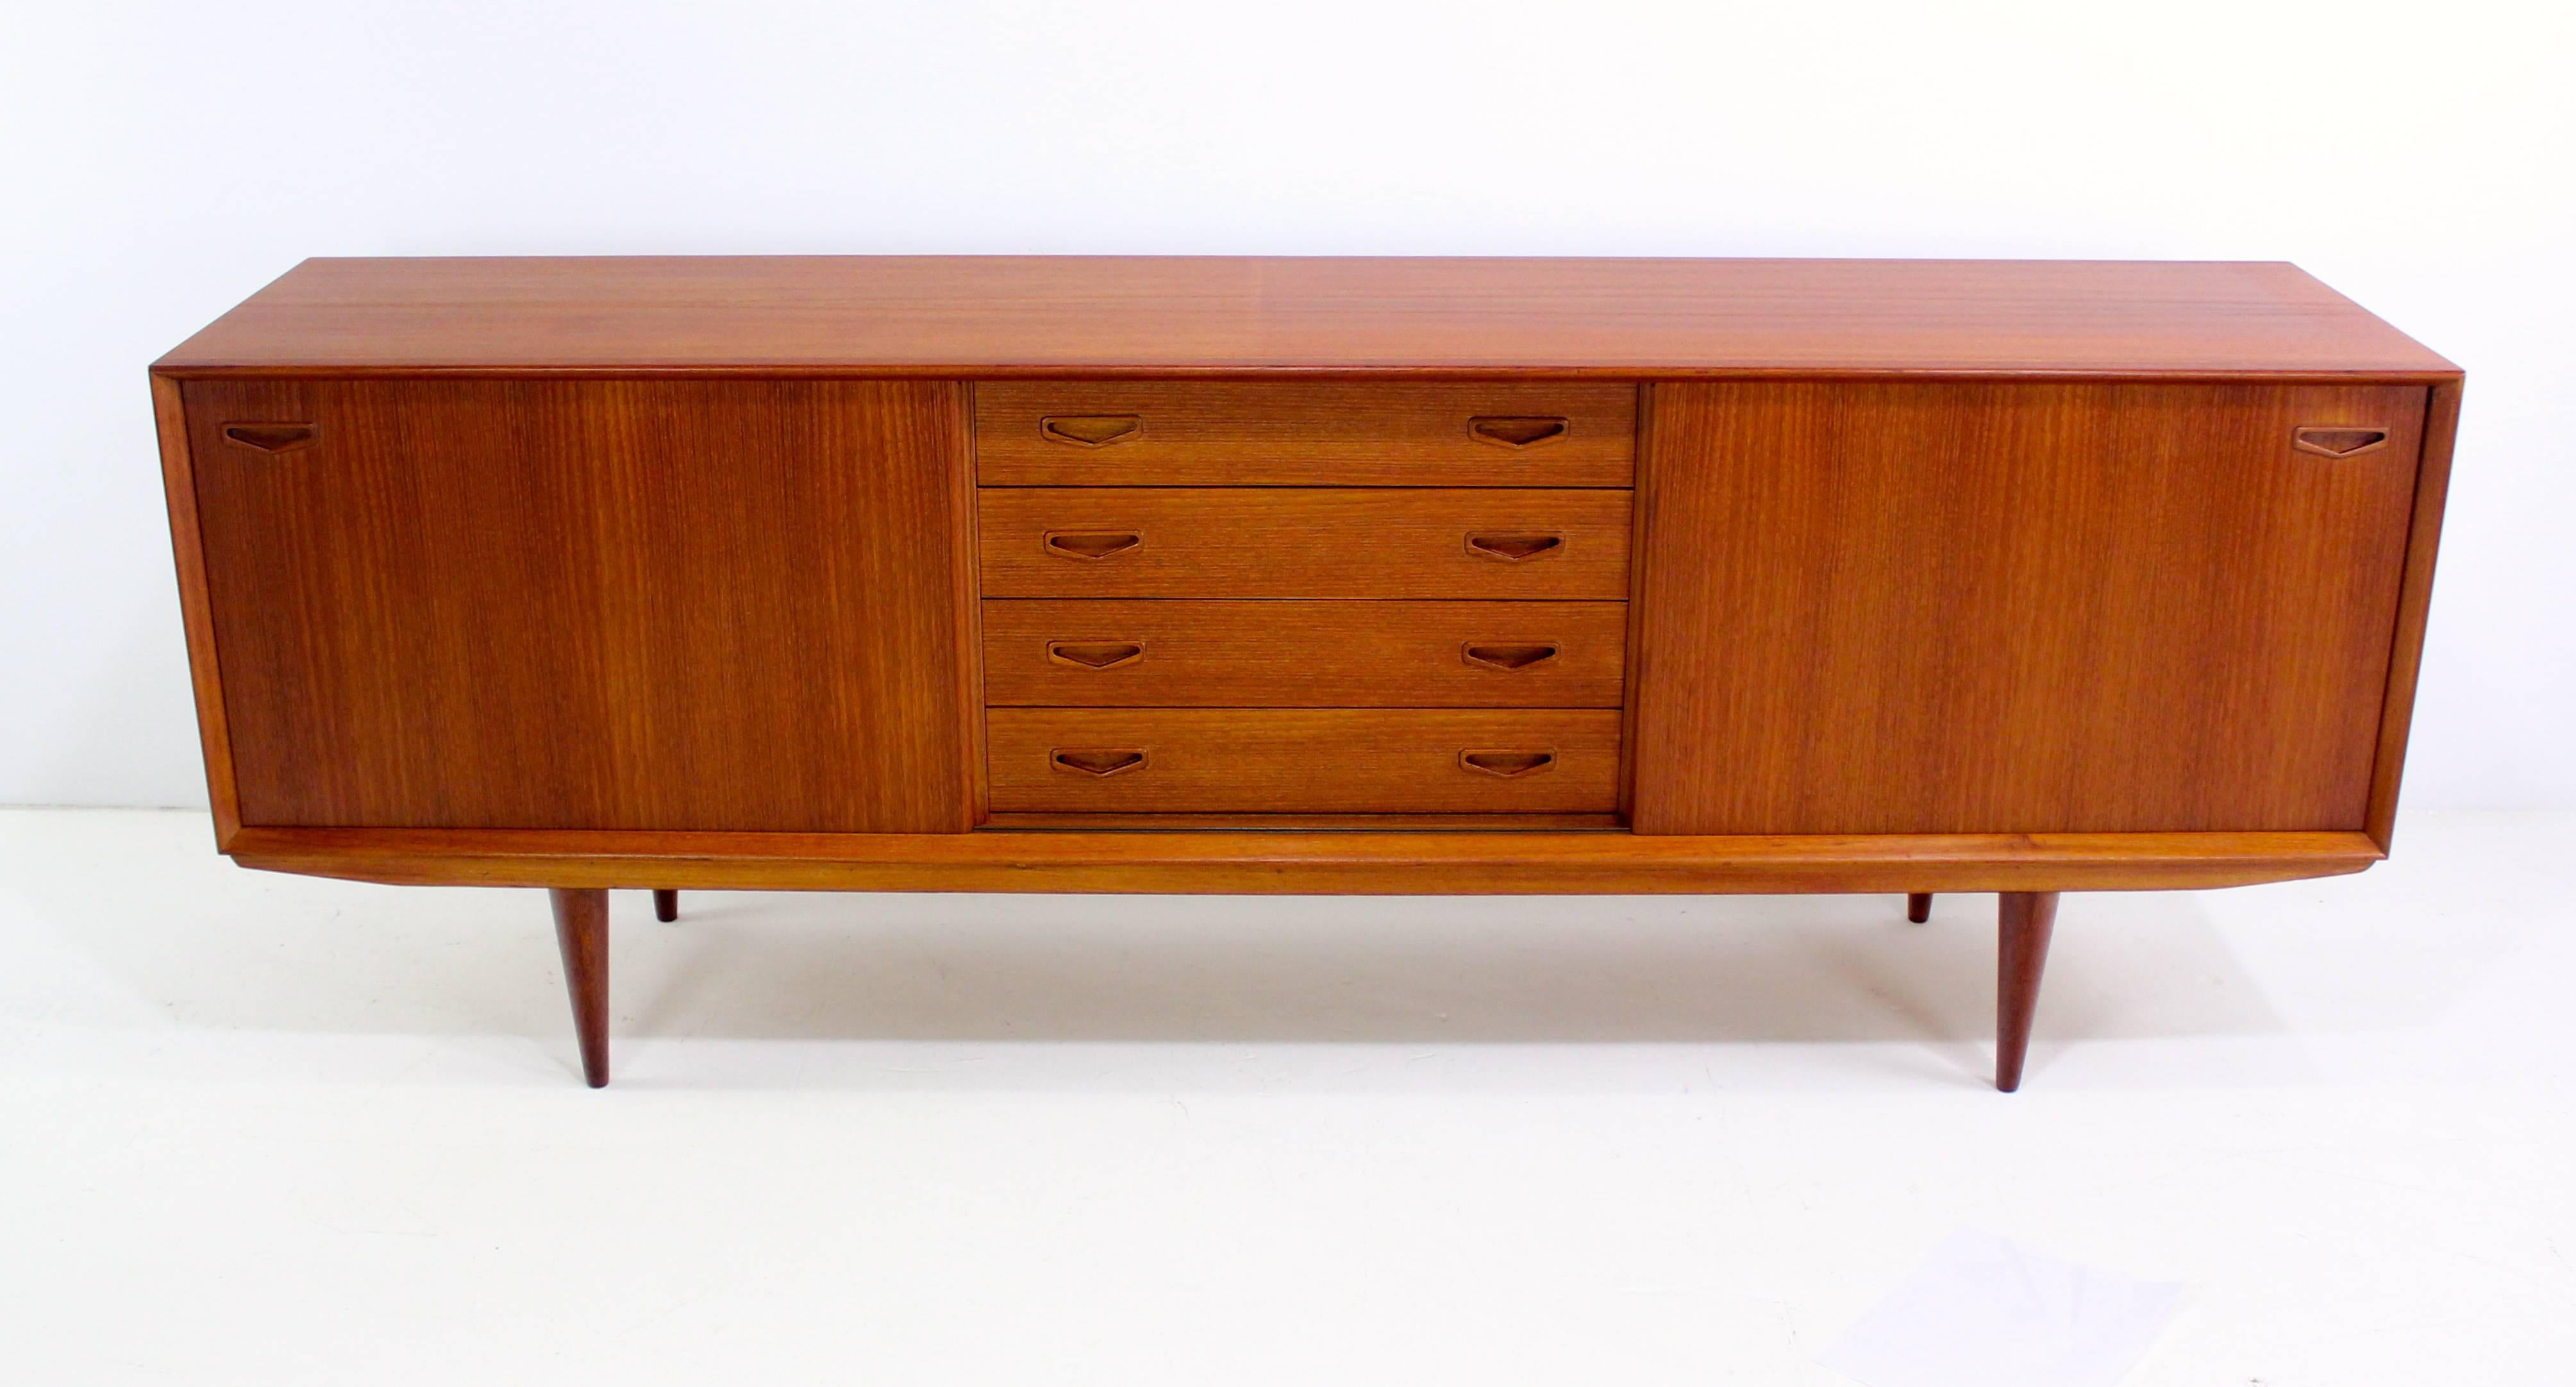 Danish modern credenza with timeless modern style.
Clausen & Søn, maker.
Richly grained teak.
Four drawers with chevron handles in the middle, the top drawer is felt-lined.
Sliding doors open to adjustable shelving on each end.
Finished on the